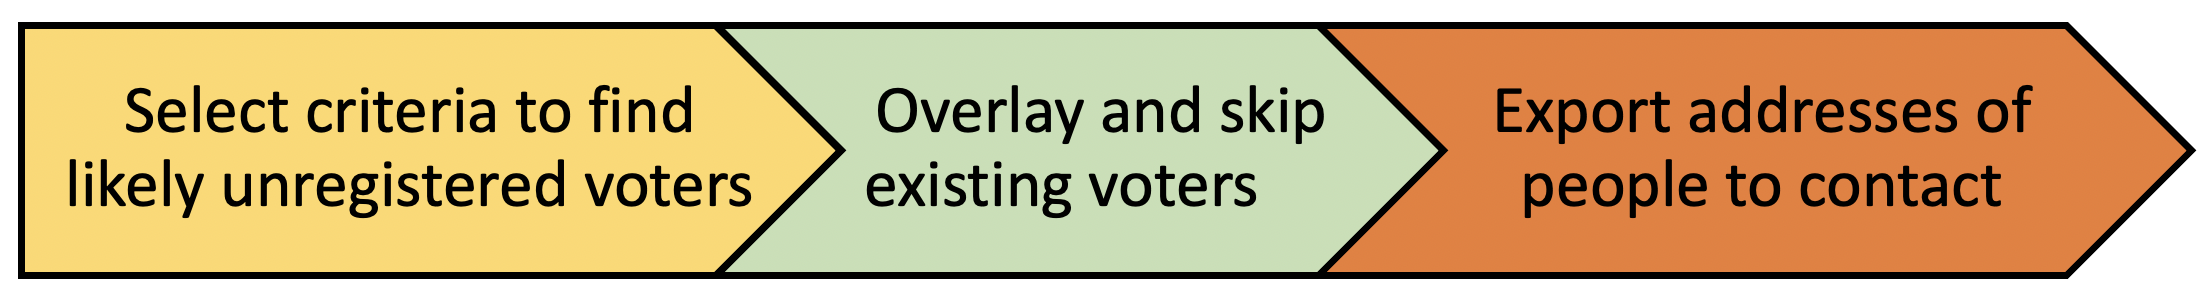 Find areas with a high likelihood of having unregistered voters.